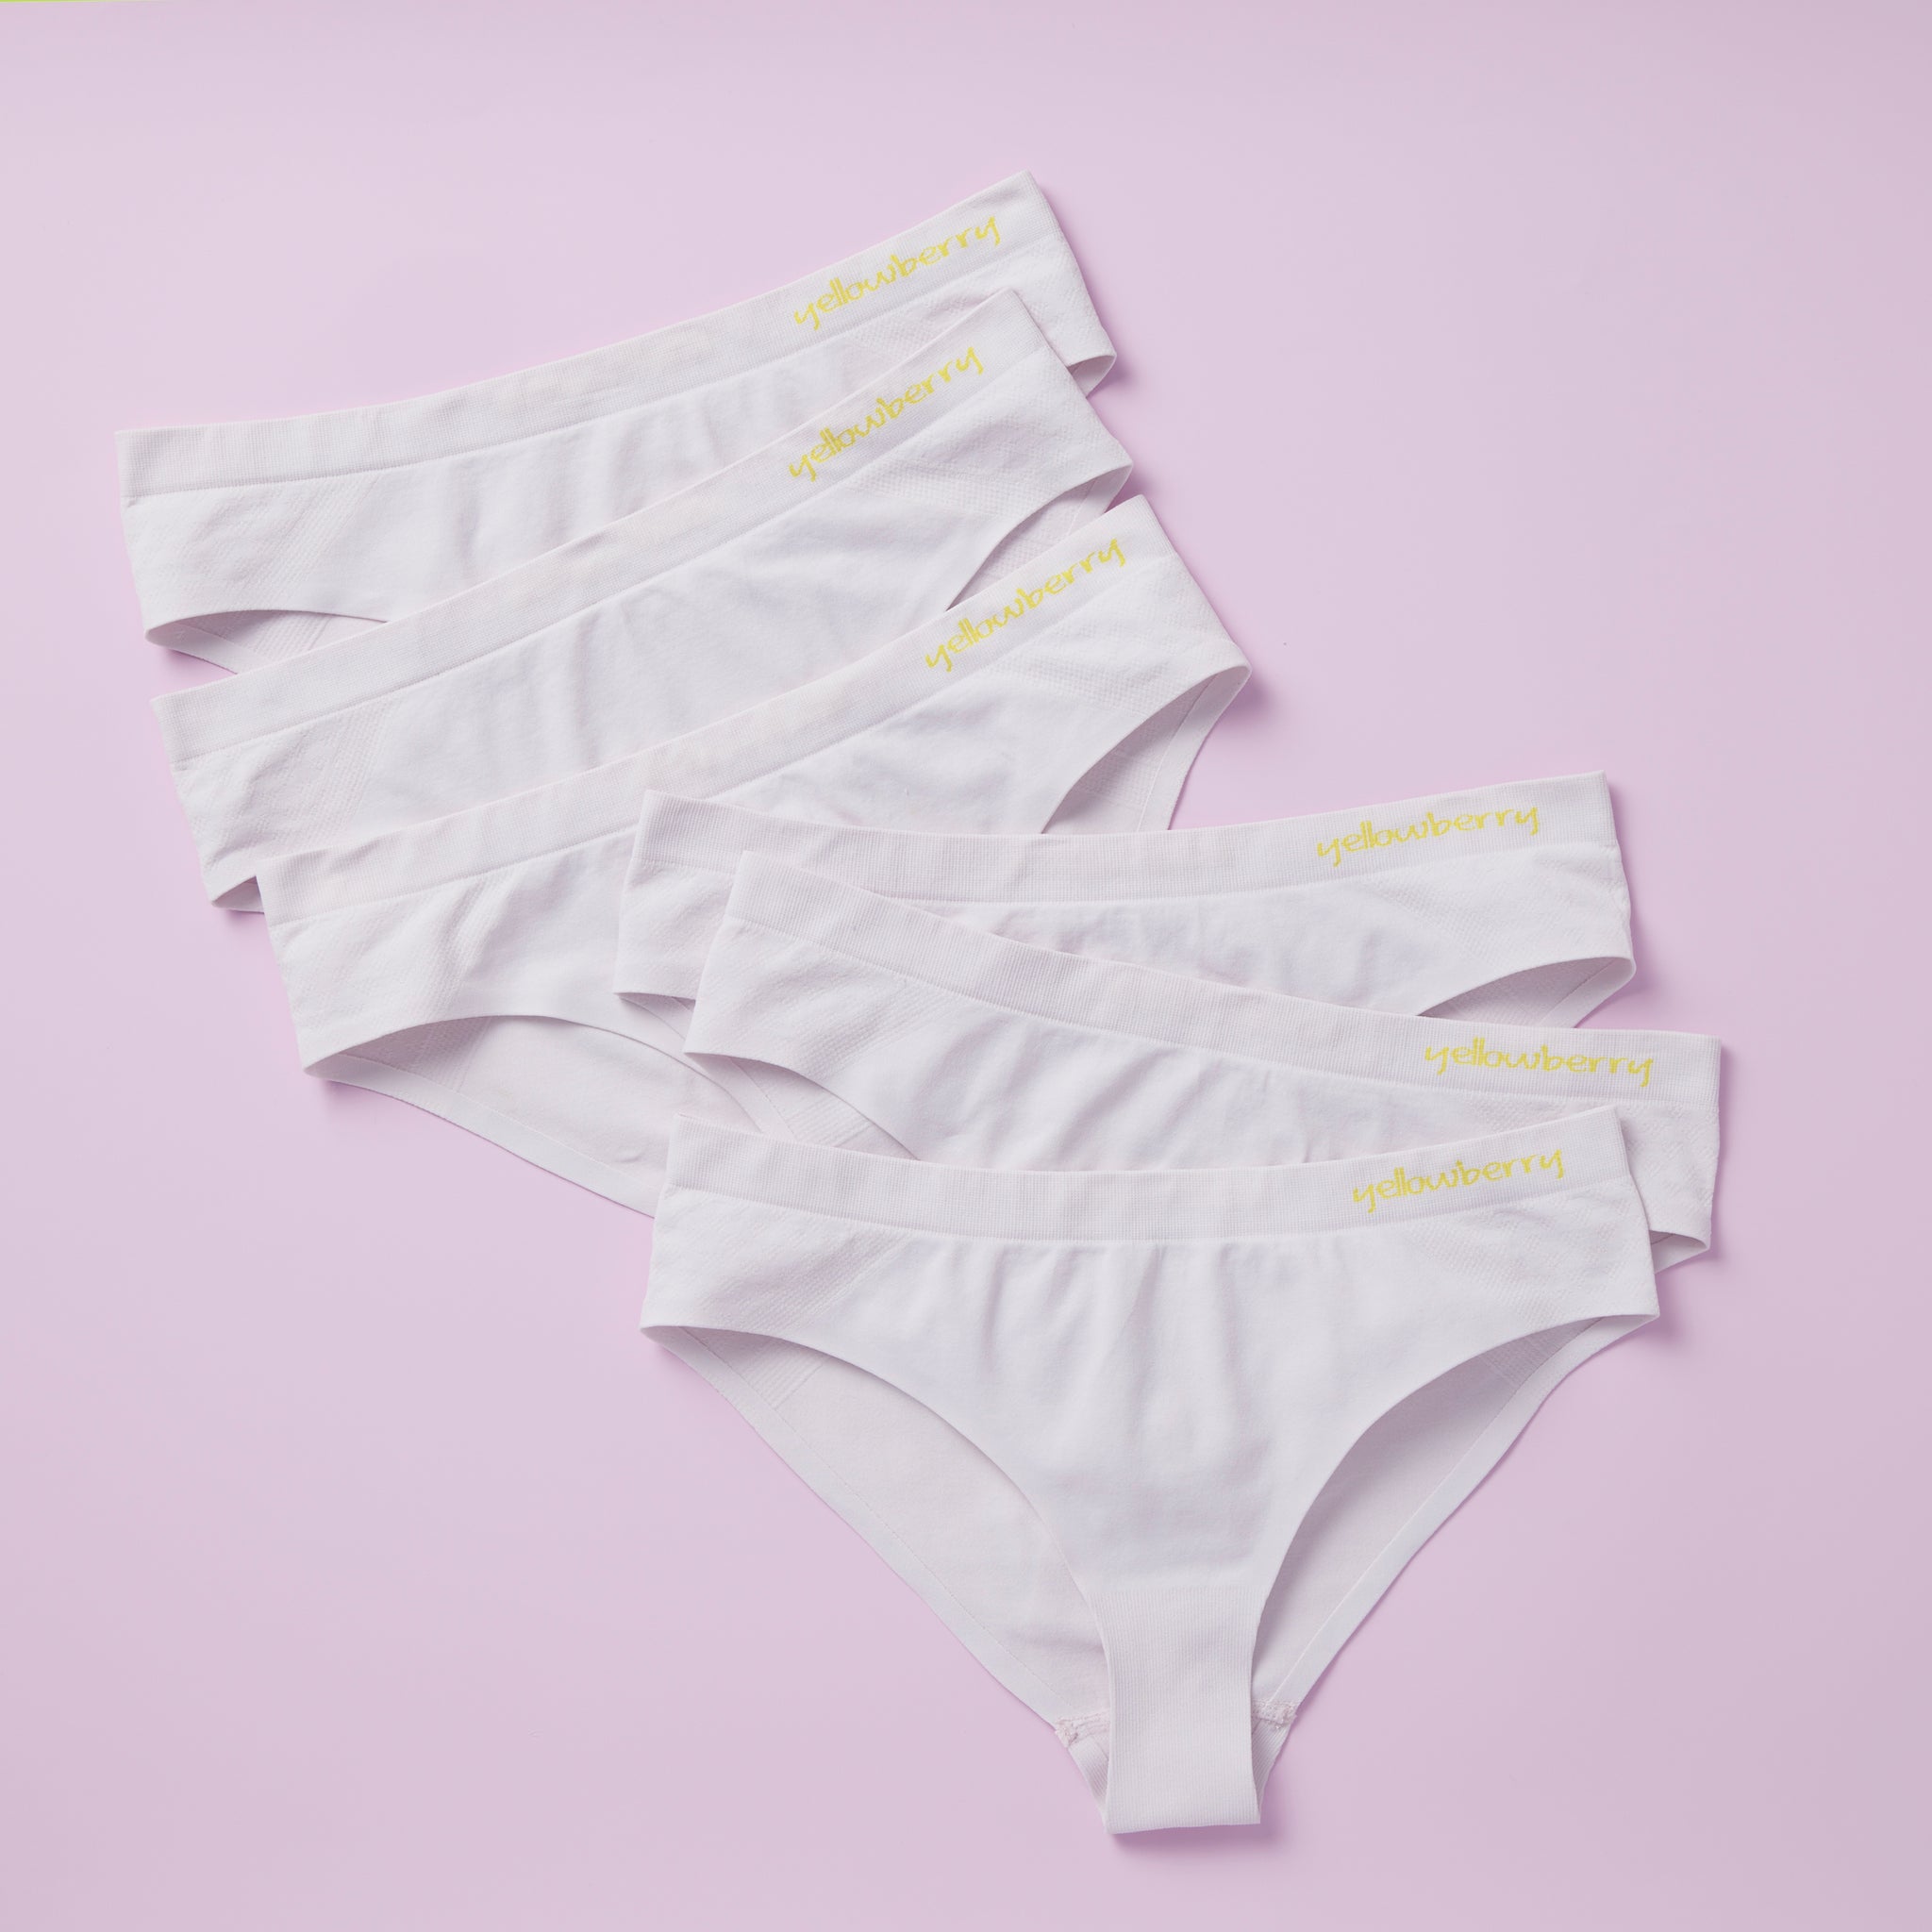 Introducing: The YellowBerry Company That's Creating Age Appropriate Kids  Innerwear